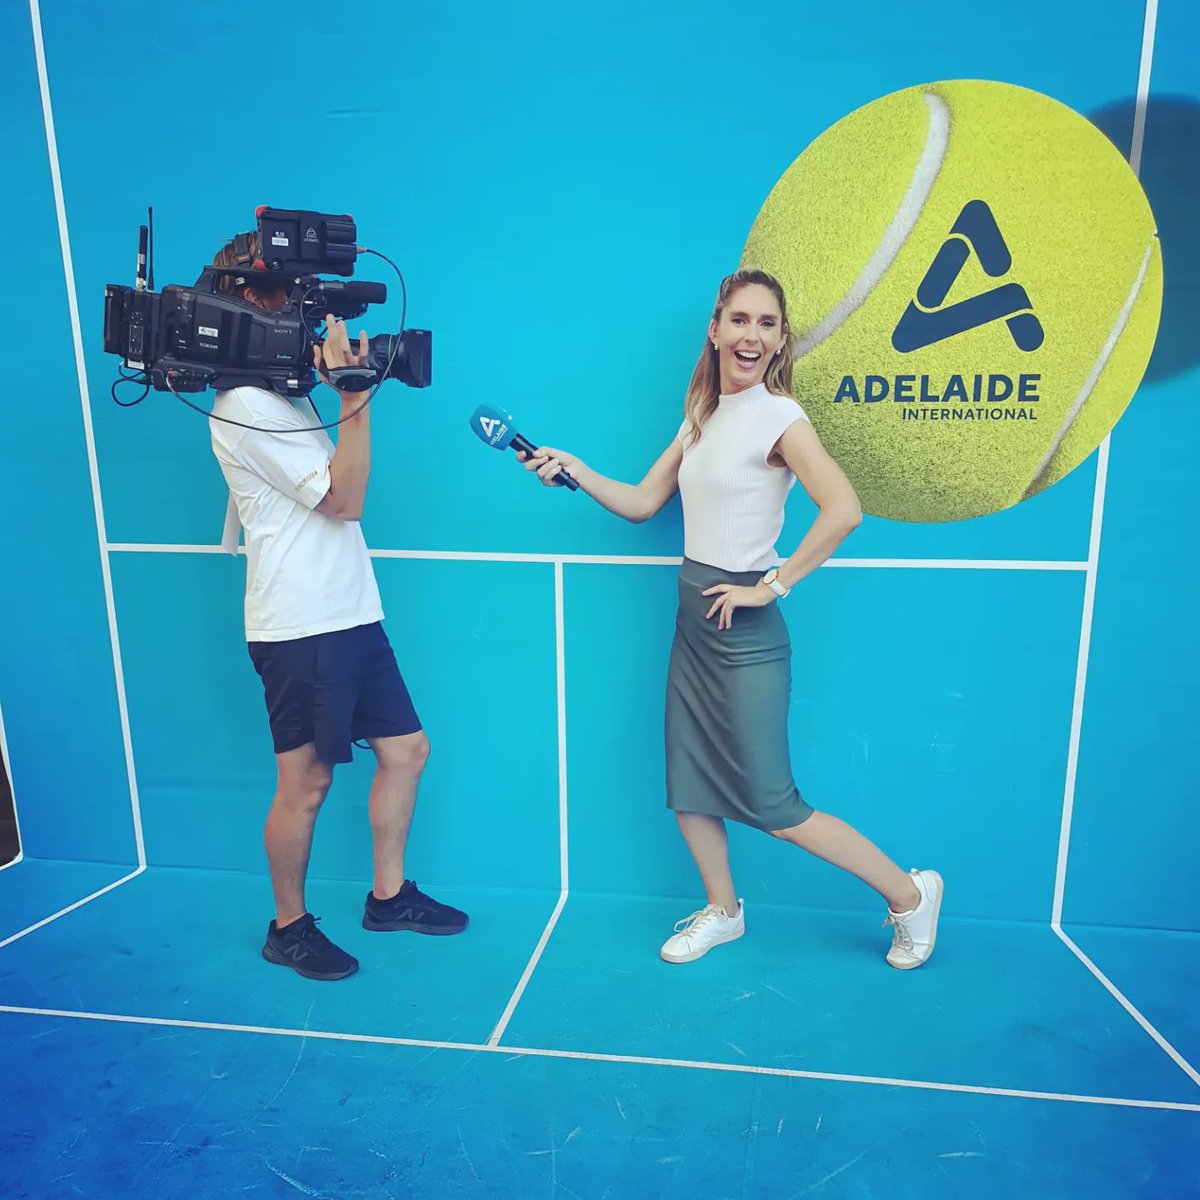 Huge week hosting as the world's best tennis players came to town! So happy to have brought you all the action with @AdelaideTennis and @Channel9. @9NewsAdel #adelaidetennis #adelaideinternational